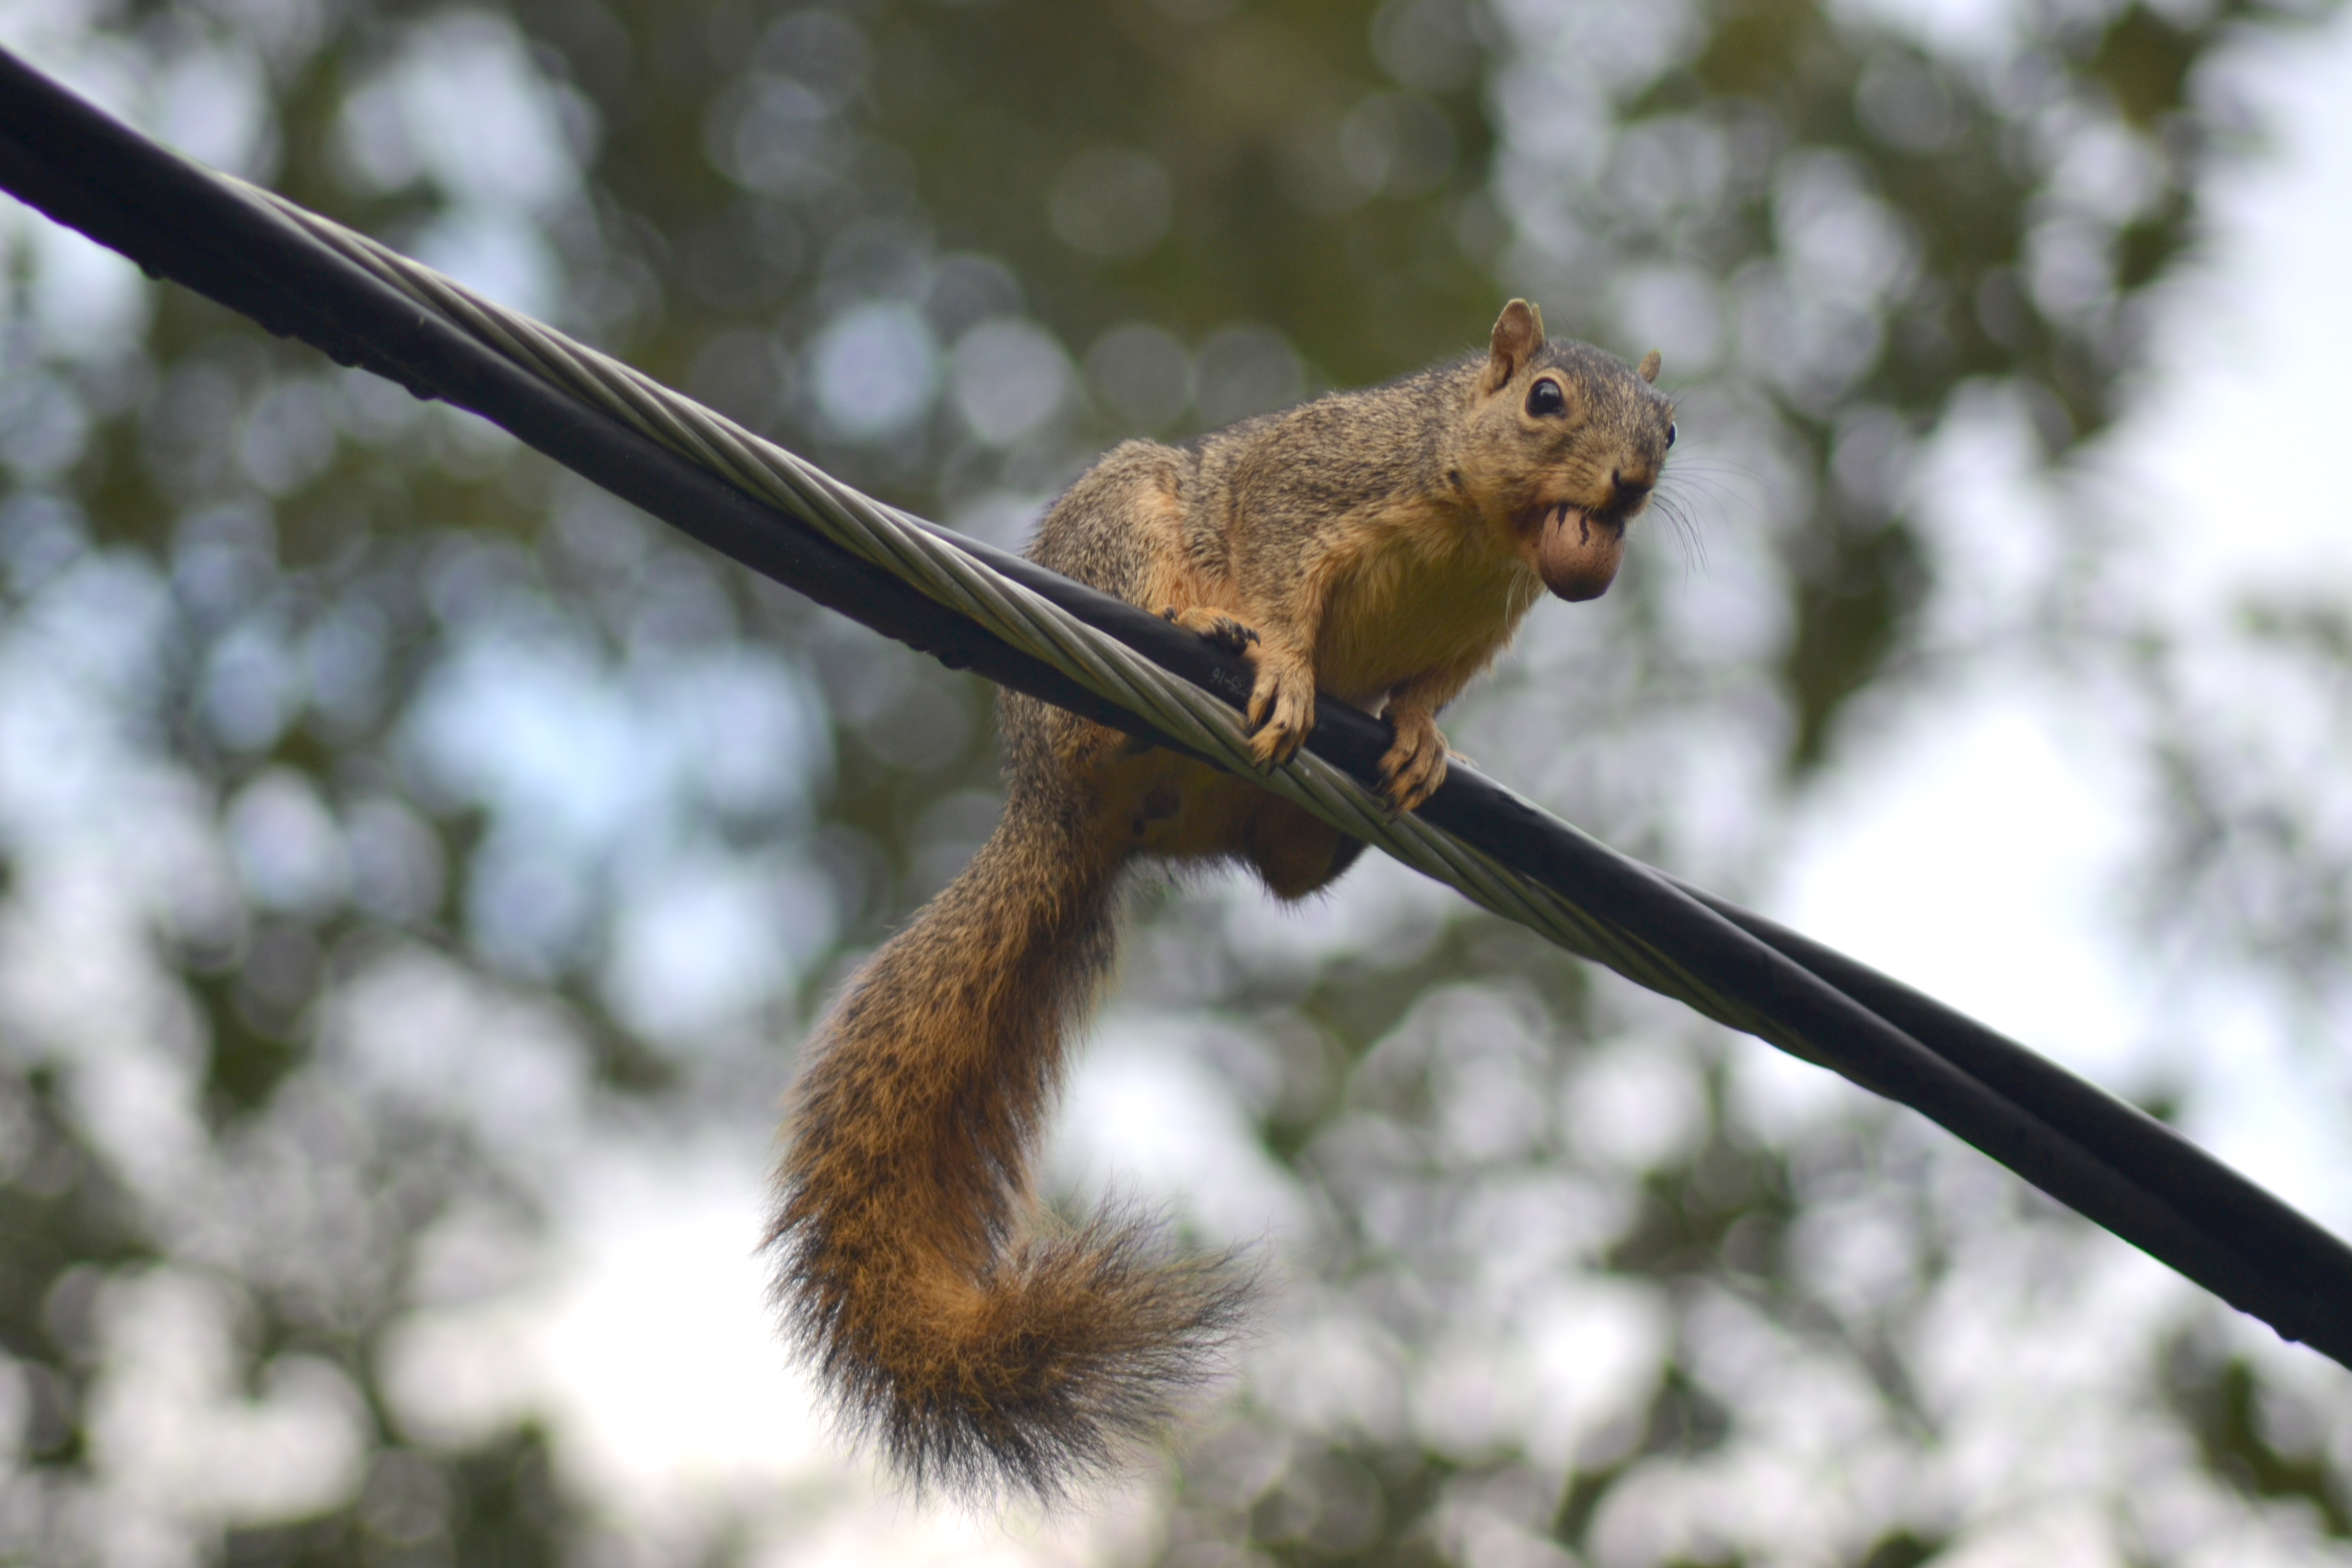 When it comes to animal-caused power outages, squirrels are the GOAT!